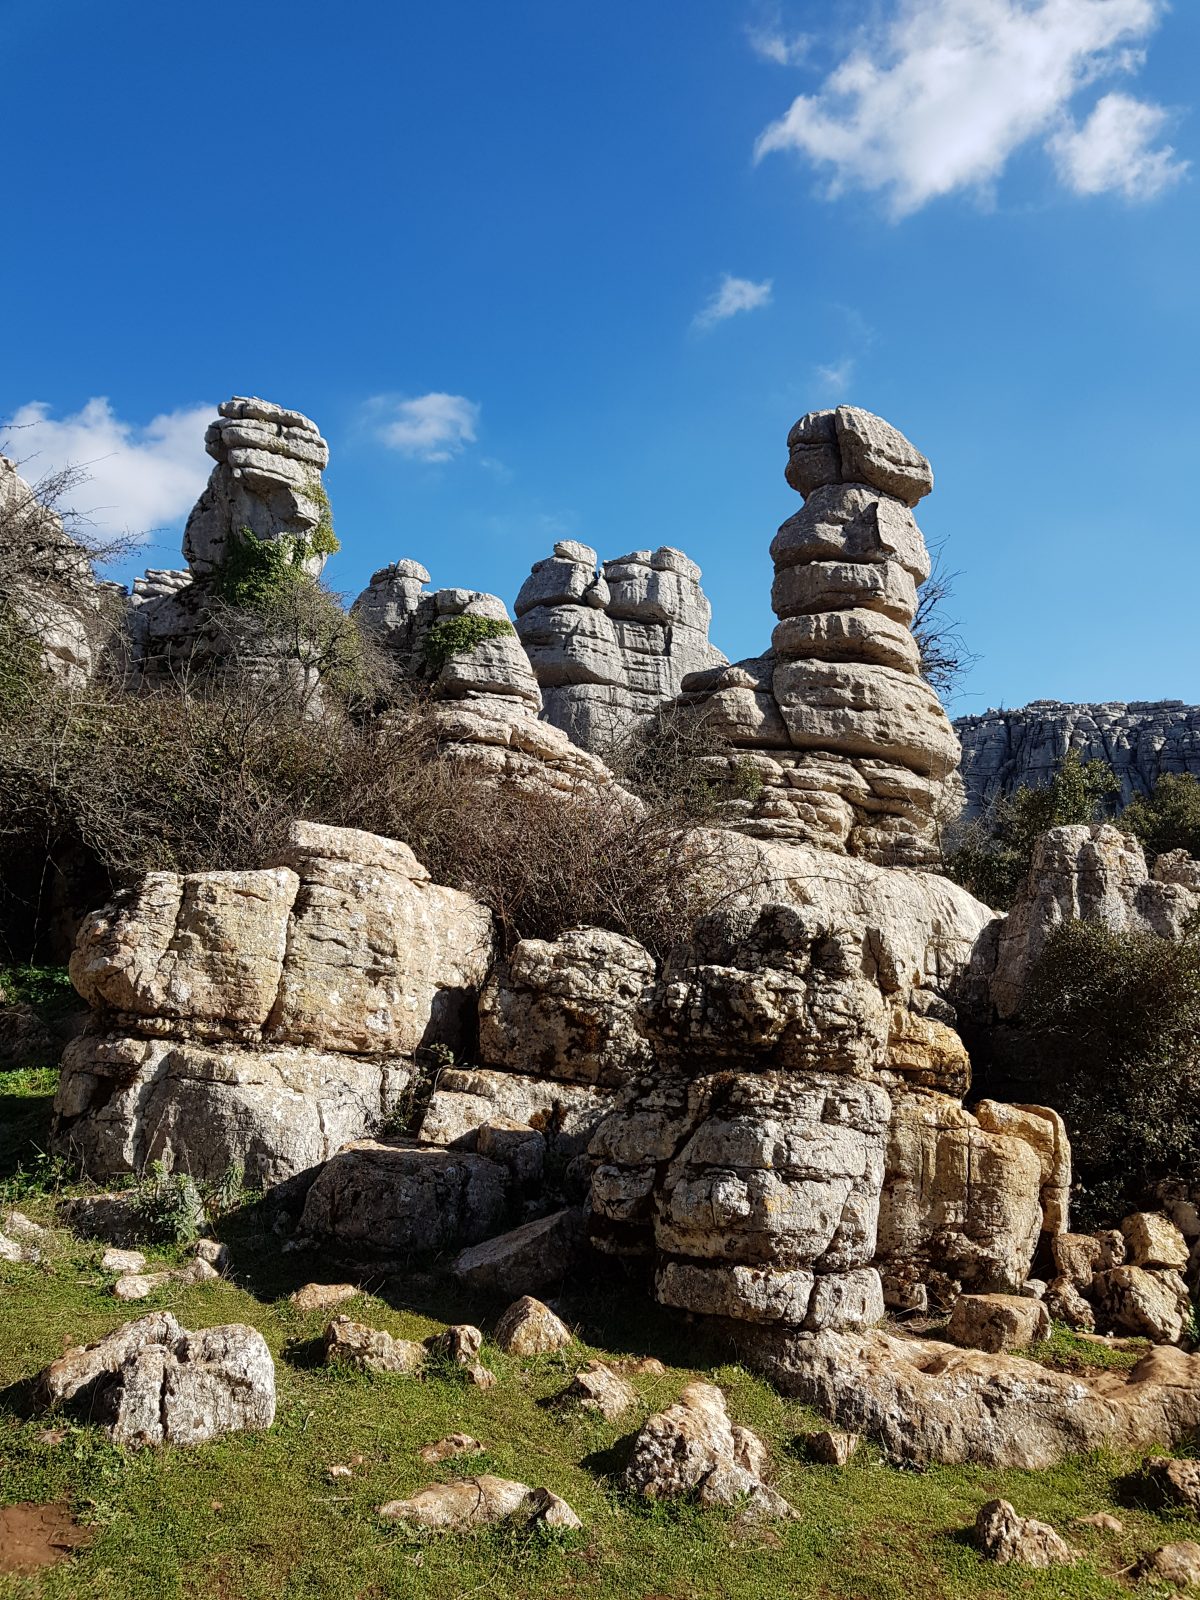 El Torcal: Guide to this 150 million year old landscape